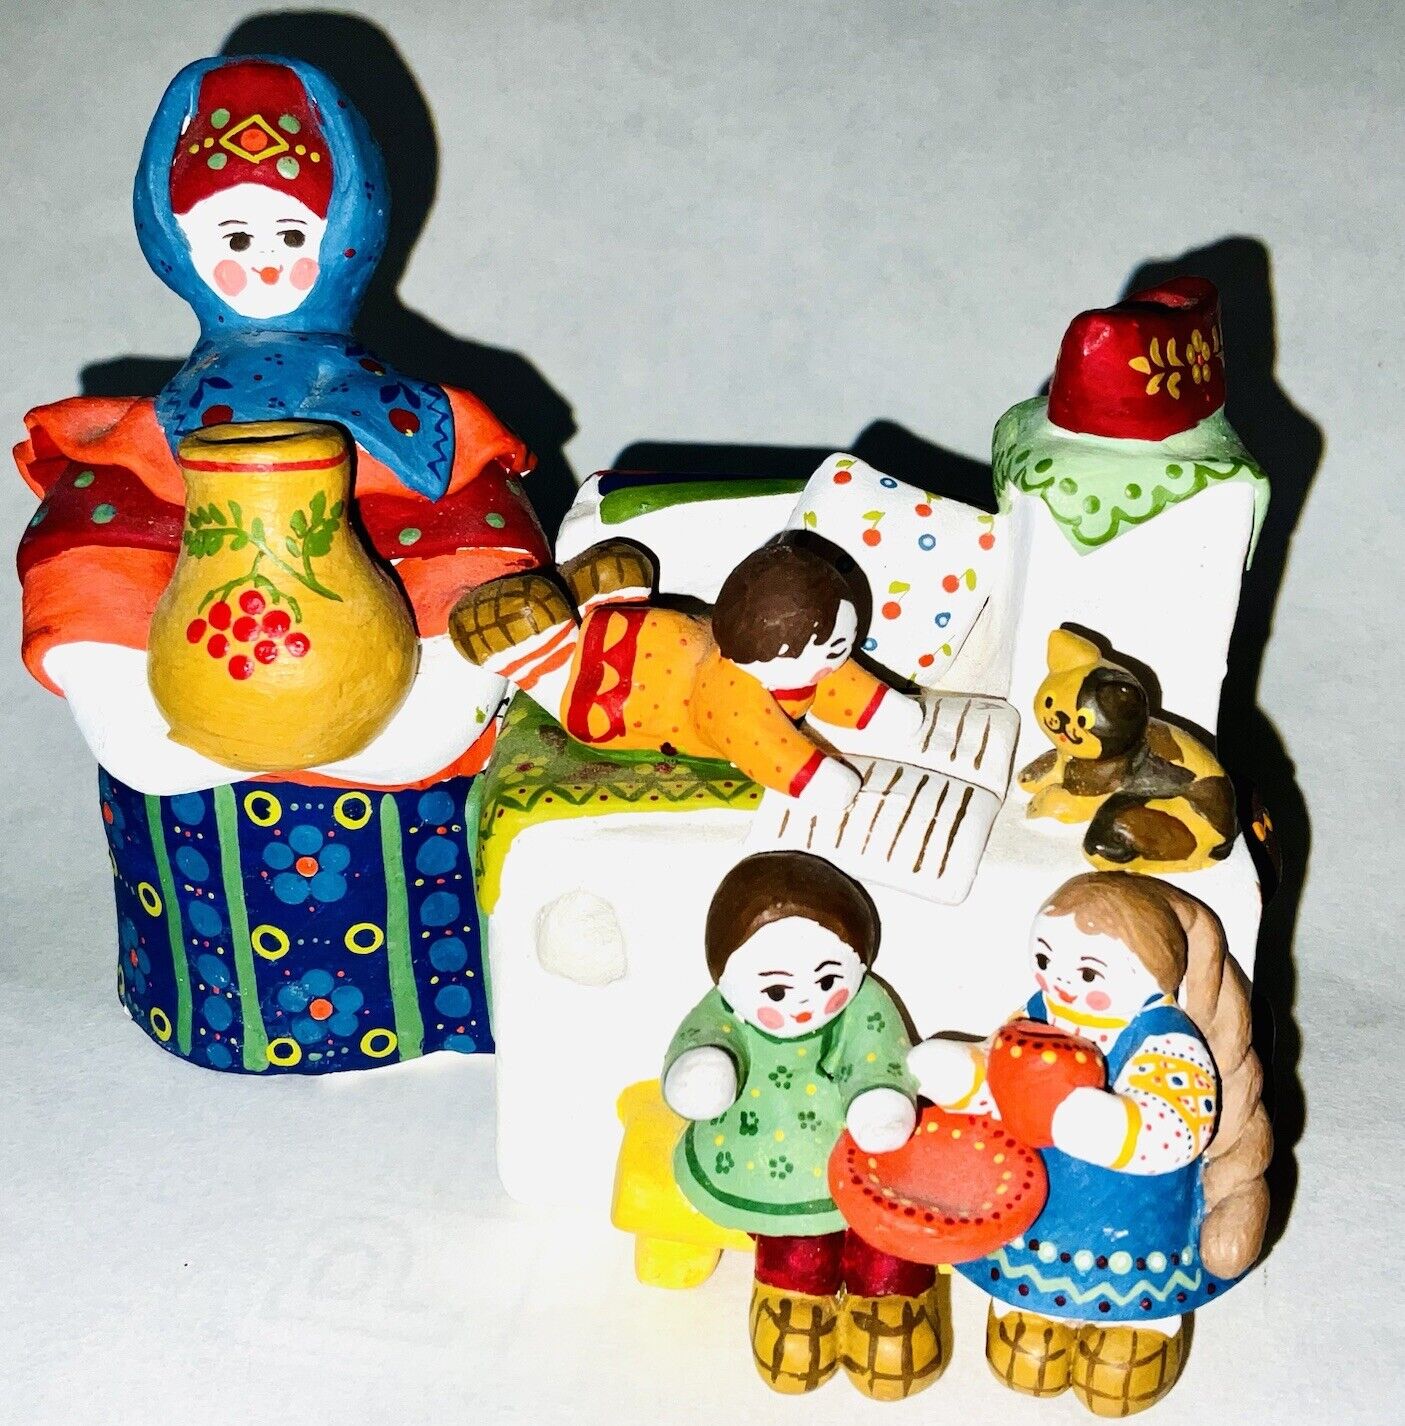 Vintage Russian Clay Sculpture Depicting A Peasant Family Around A Warm Oven